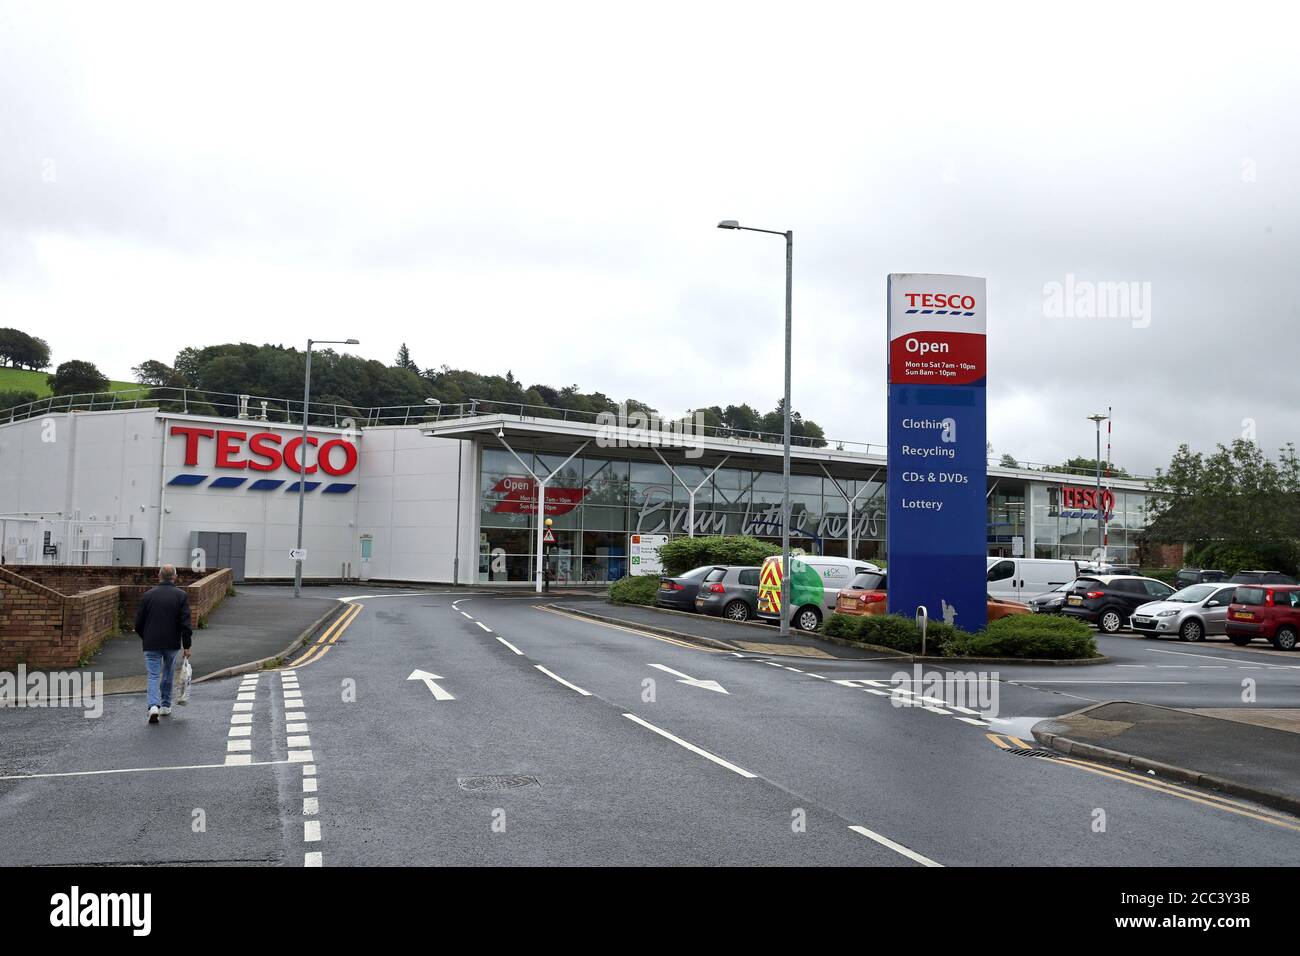 Tesco store in Lockerbie, Scotland, where the discovery of a jar of contaminated baby food prompted Tesco to issue a national product recall and remove remaining stock from its shelves. Nigel Wright is accused of trying to extort £1.4 million in bitcoin from Tesco. The farmer from Market Rasen, Lincolnshire, denies two counts of contaminating goods and three counts of blackmail for demanding cryptocurrency from Tesco in exchange for revealing where the contaminated food had been placed. Stock Photo